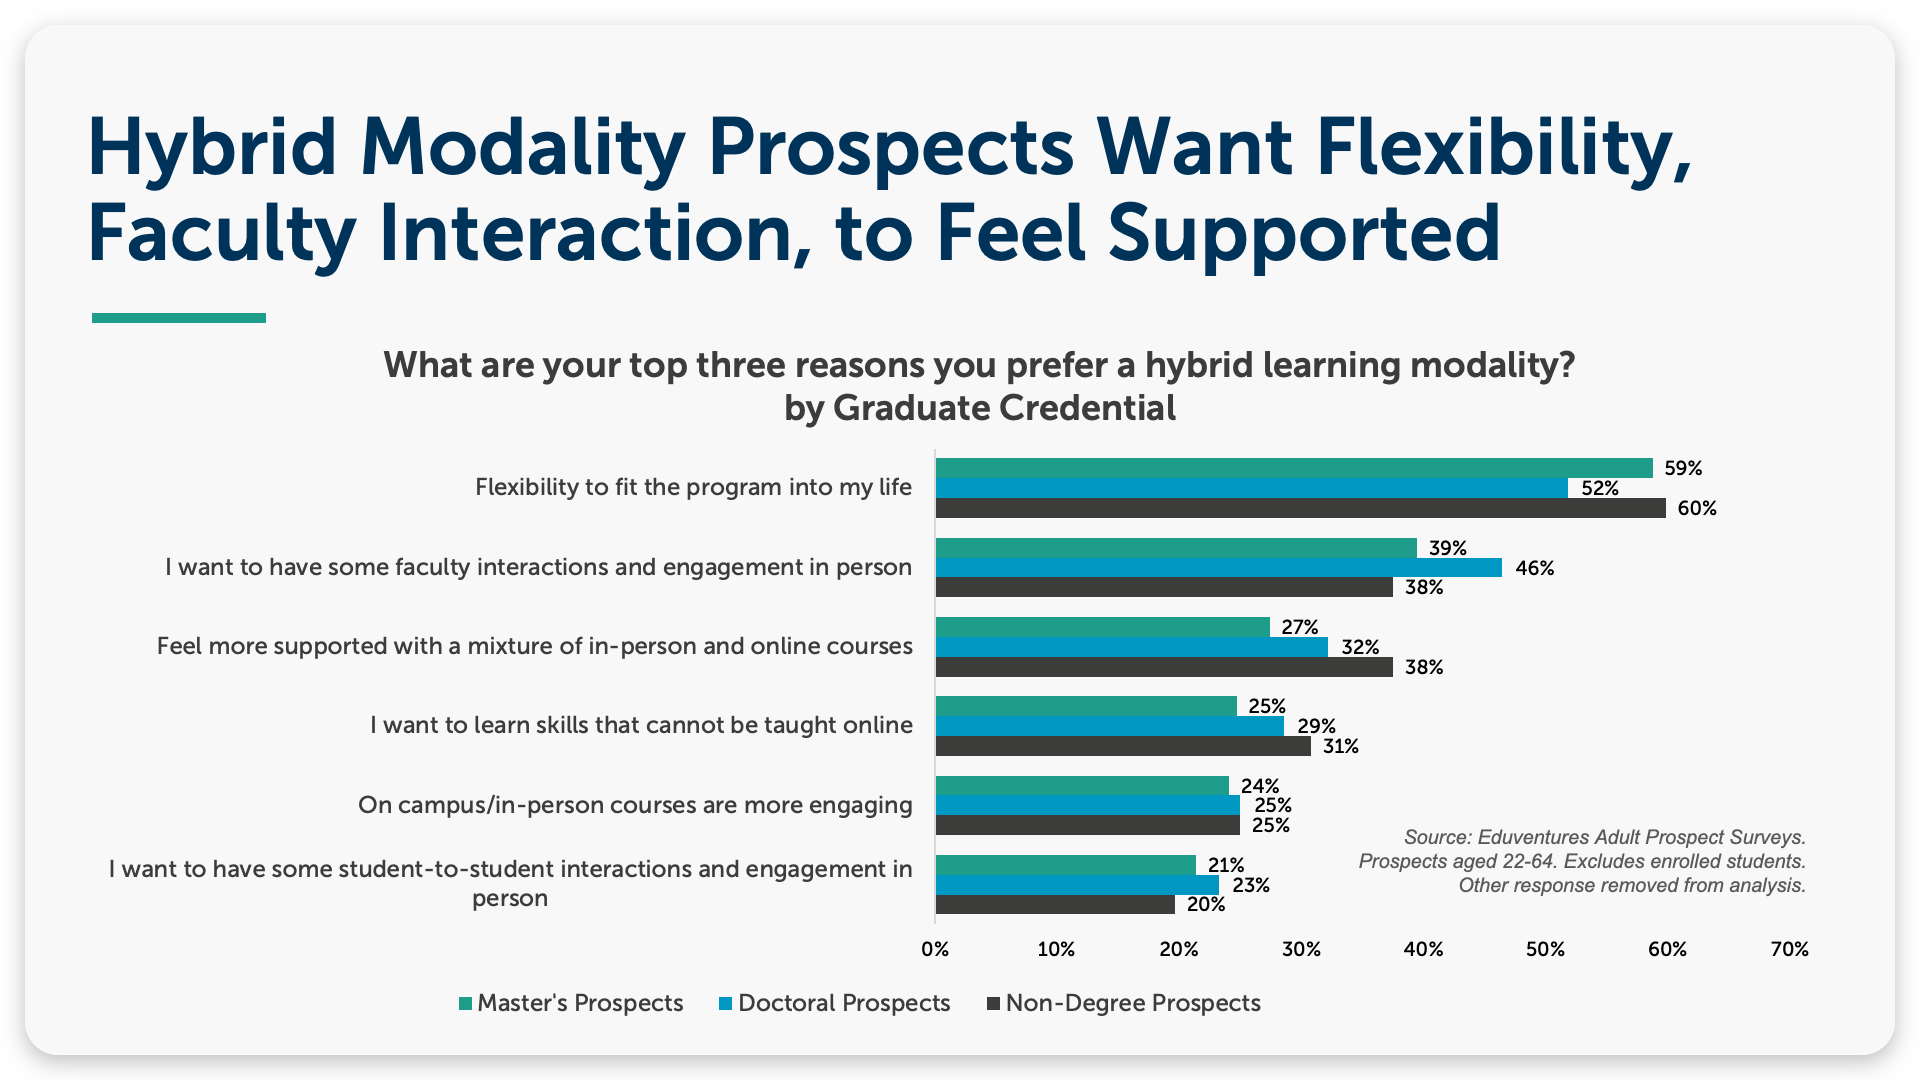 Hybrid Modality Prospects Want Flexibility, Faculty Interaction, to Feel Supported